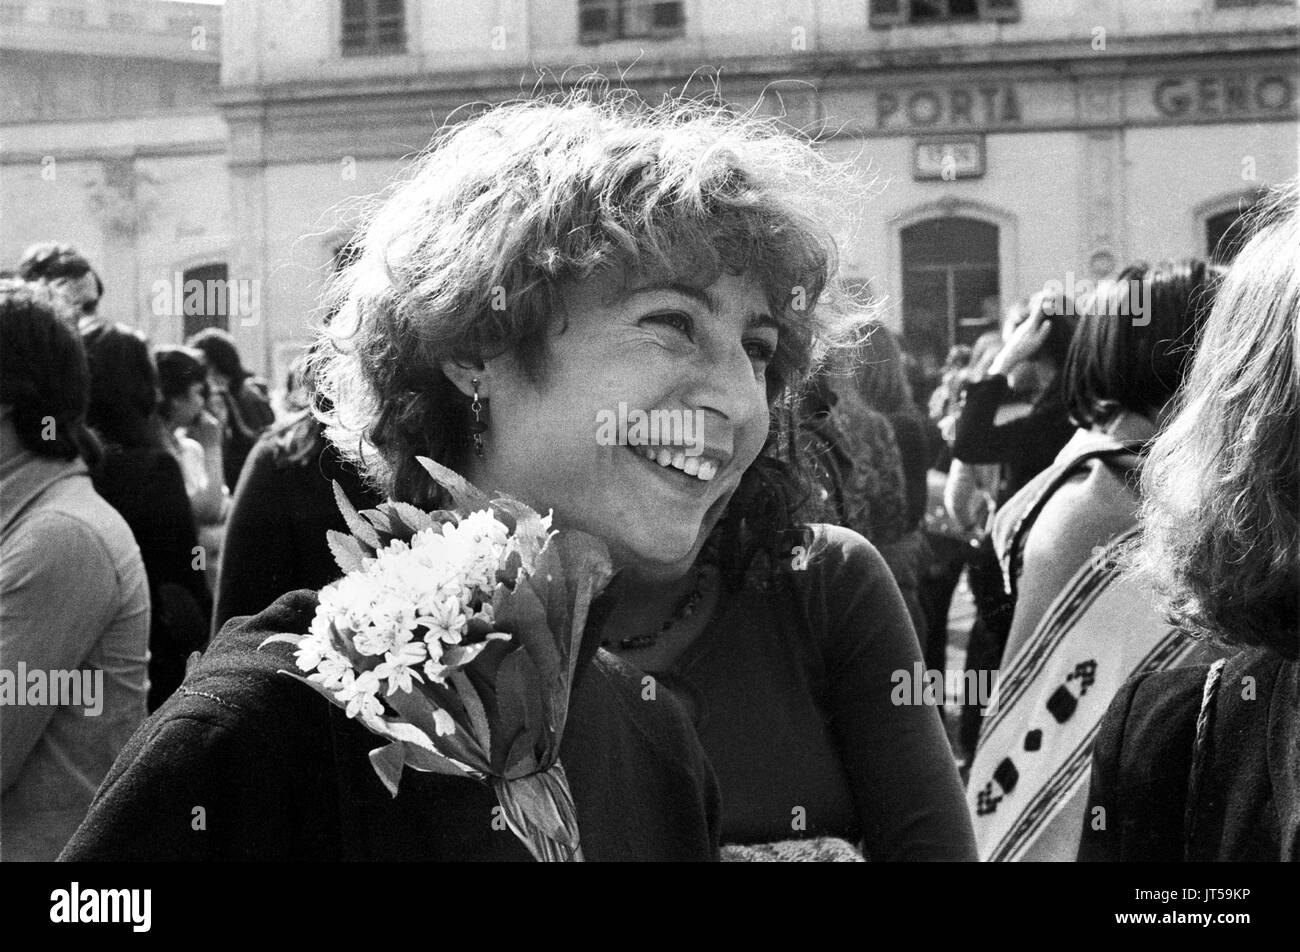 Milan (Italy), 1976, demonstration for women's rights and in defense of the abortion law Stock Photo